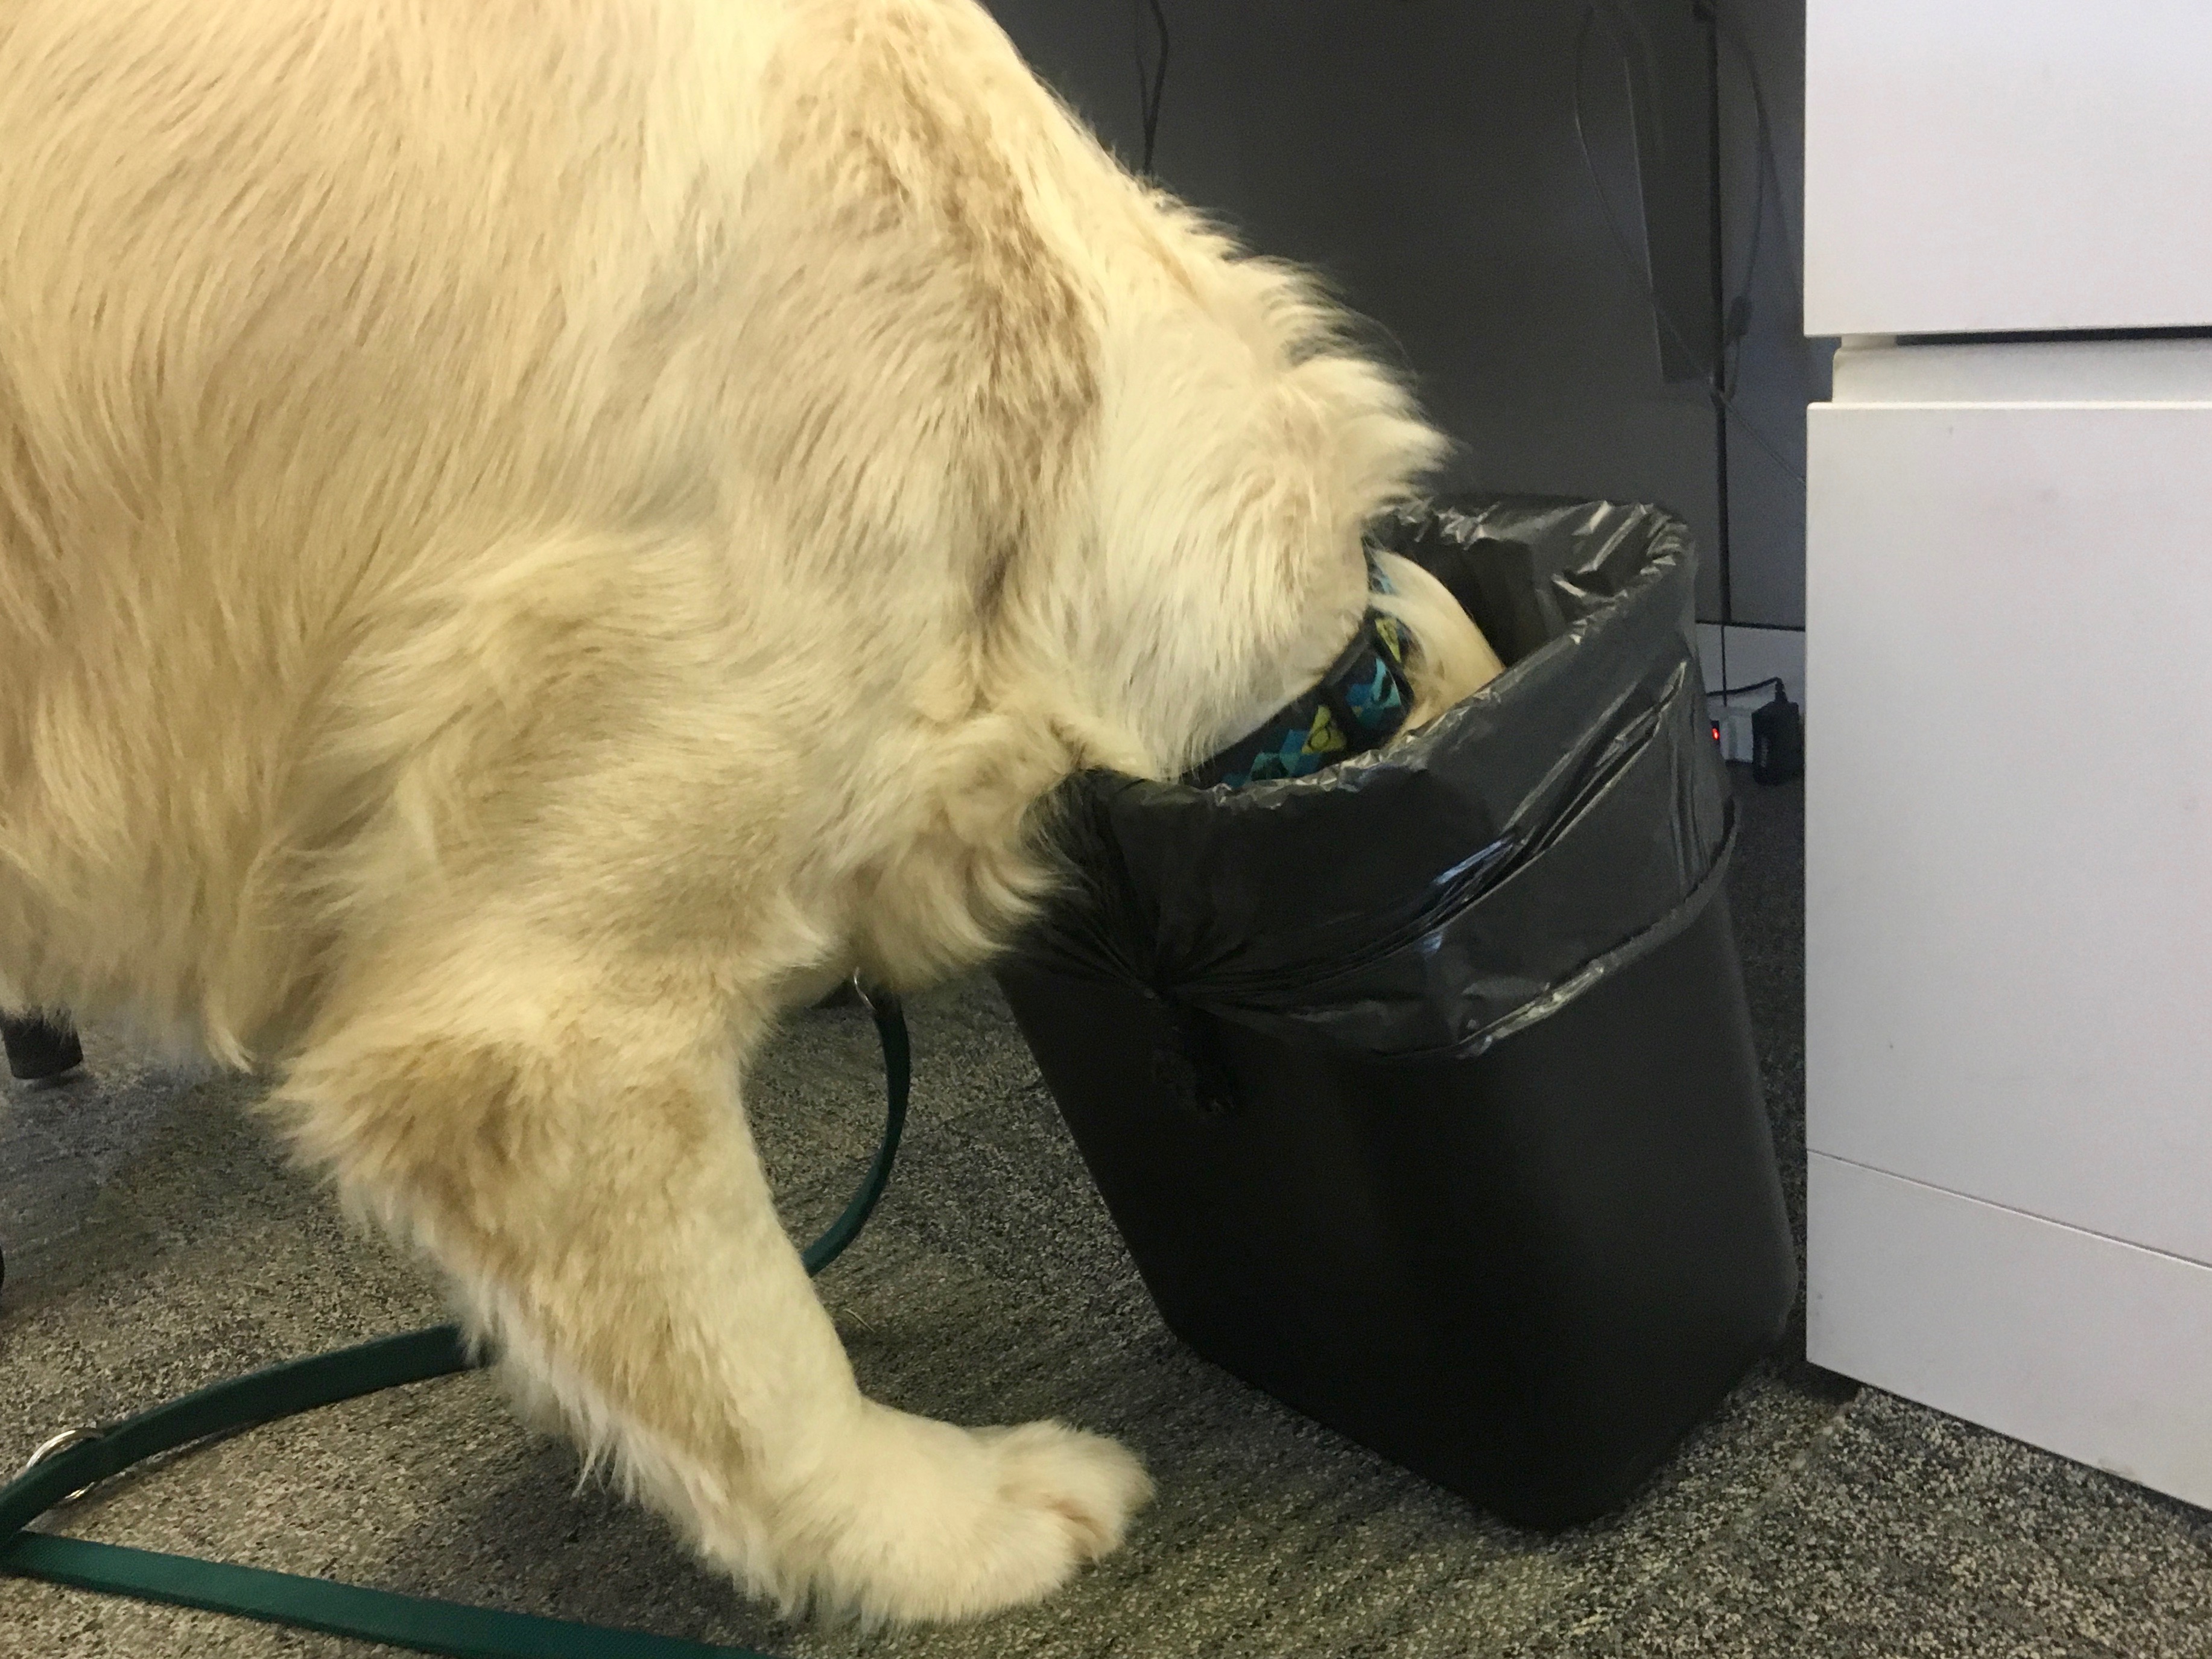 Dog with head in garbage pail